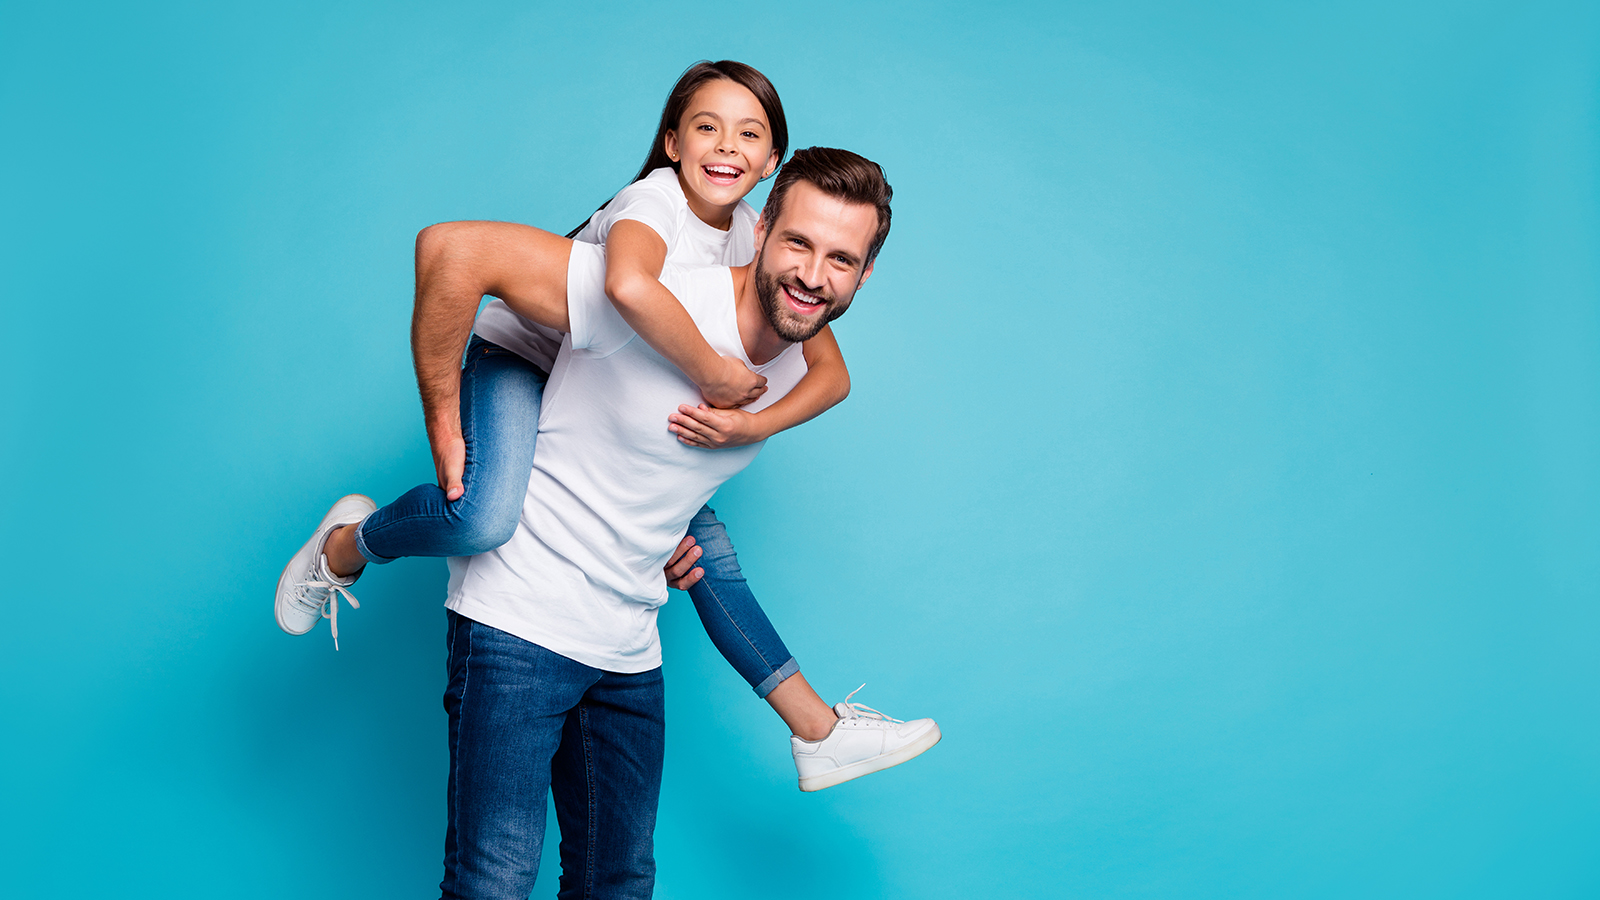 Portrait of cheerful people laughing piggyback wearing white t-shirt denim jeans isolated over blue background